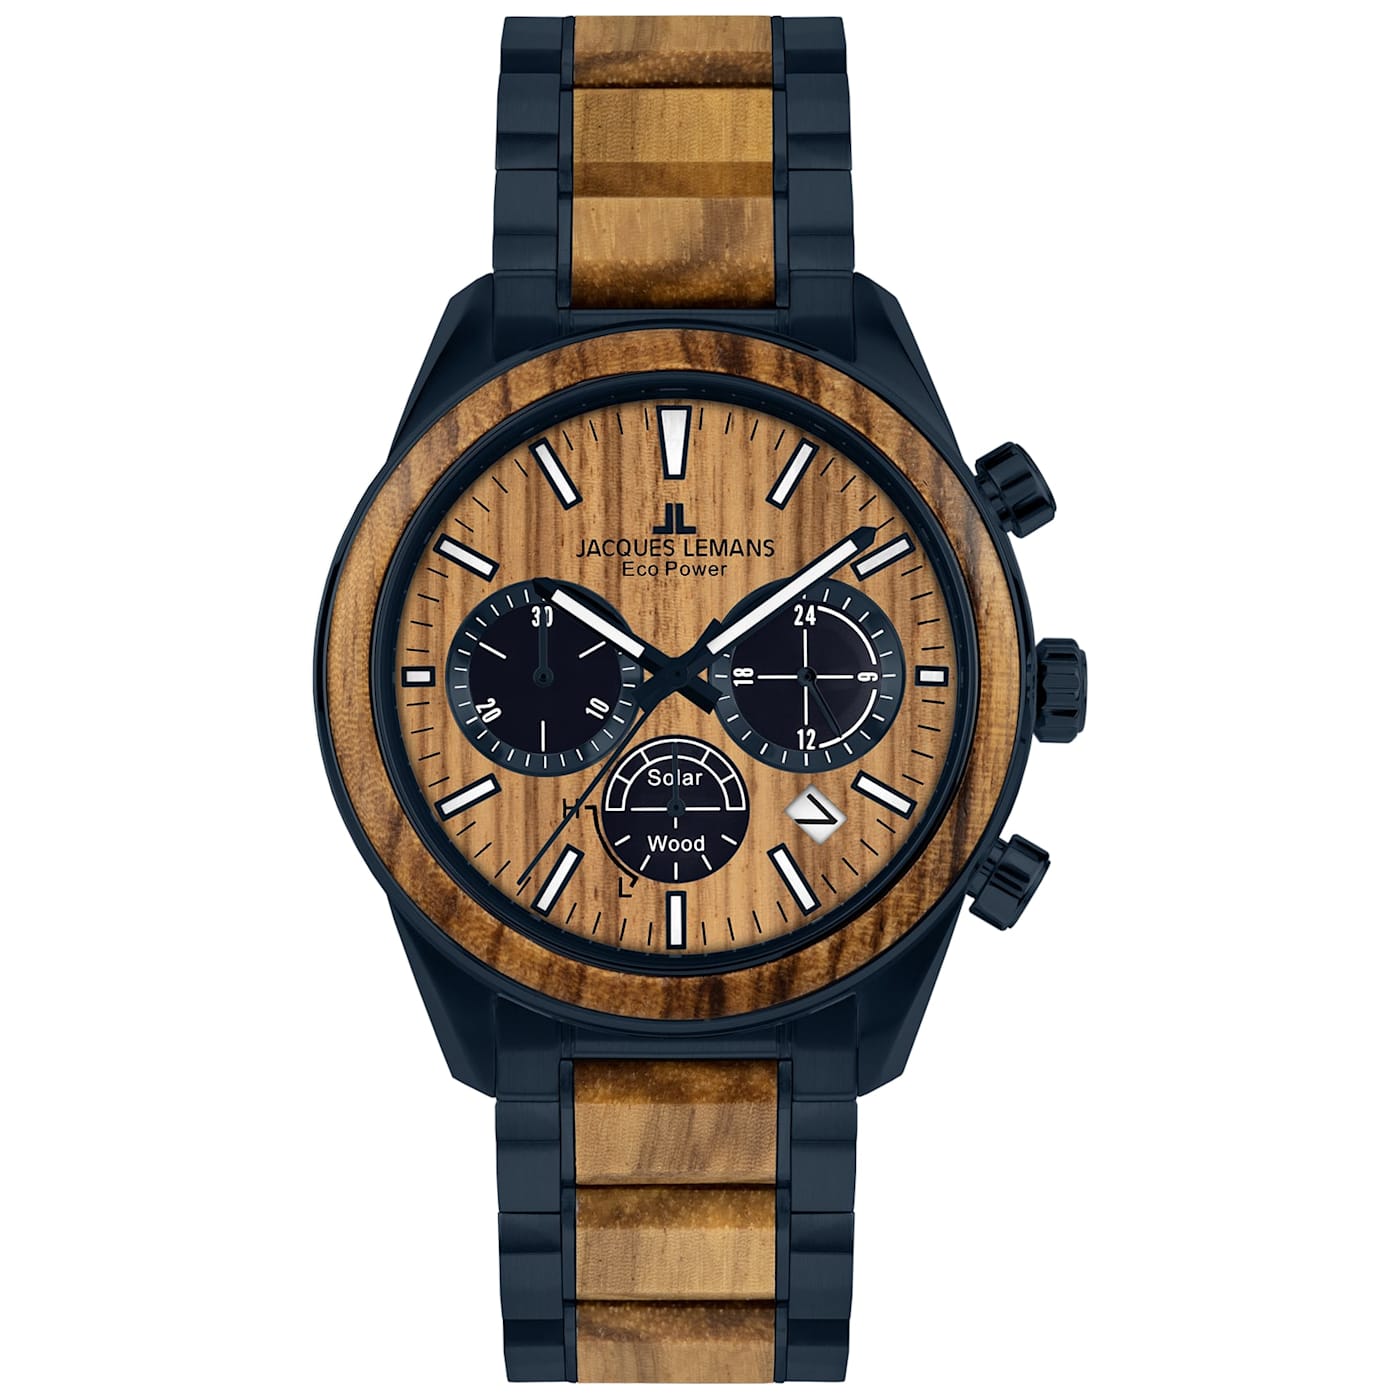 JACQUES LEMANS Eco Power Men's Watch w/Stainless Steel/Wood Inlay Strap  Blue, Chronograph 1-2115 - 12KT3A